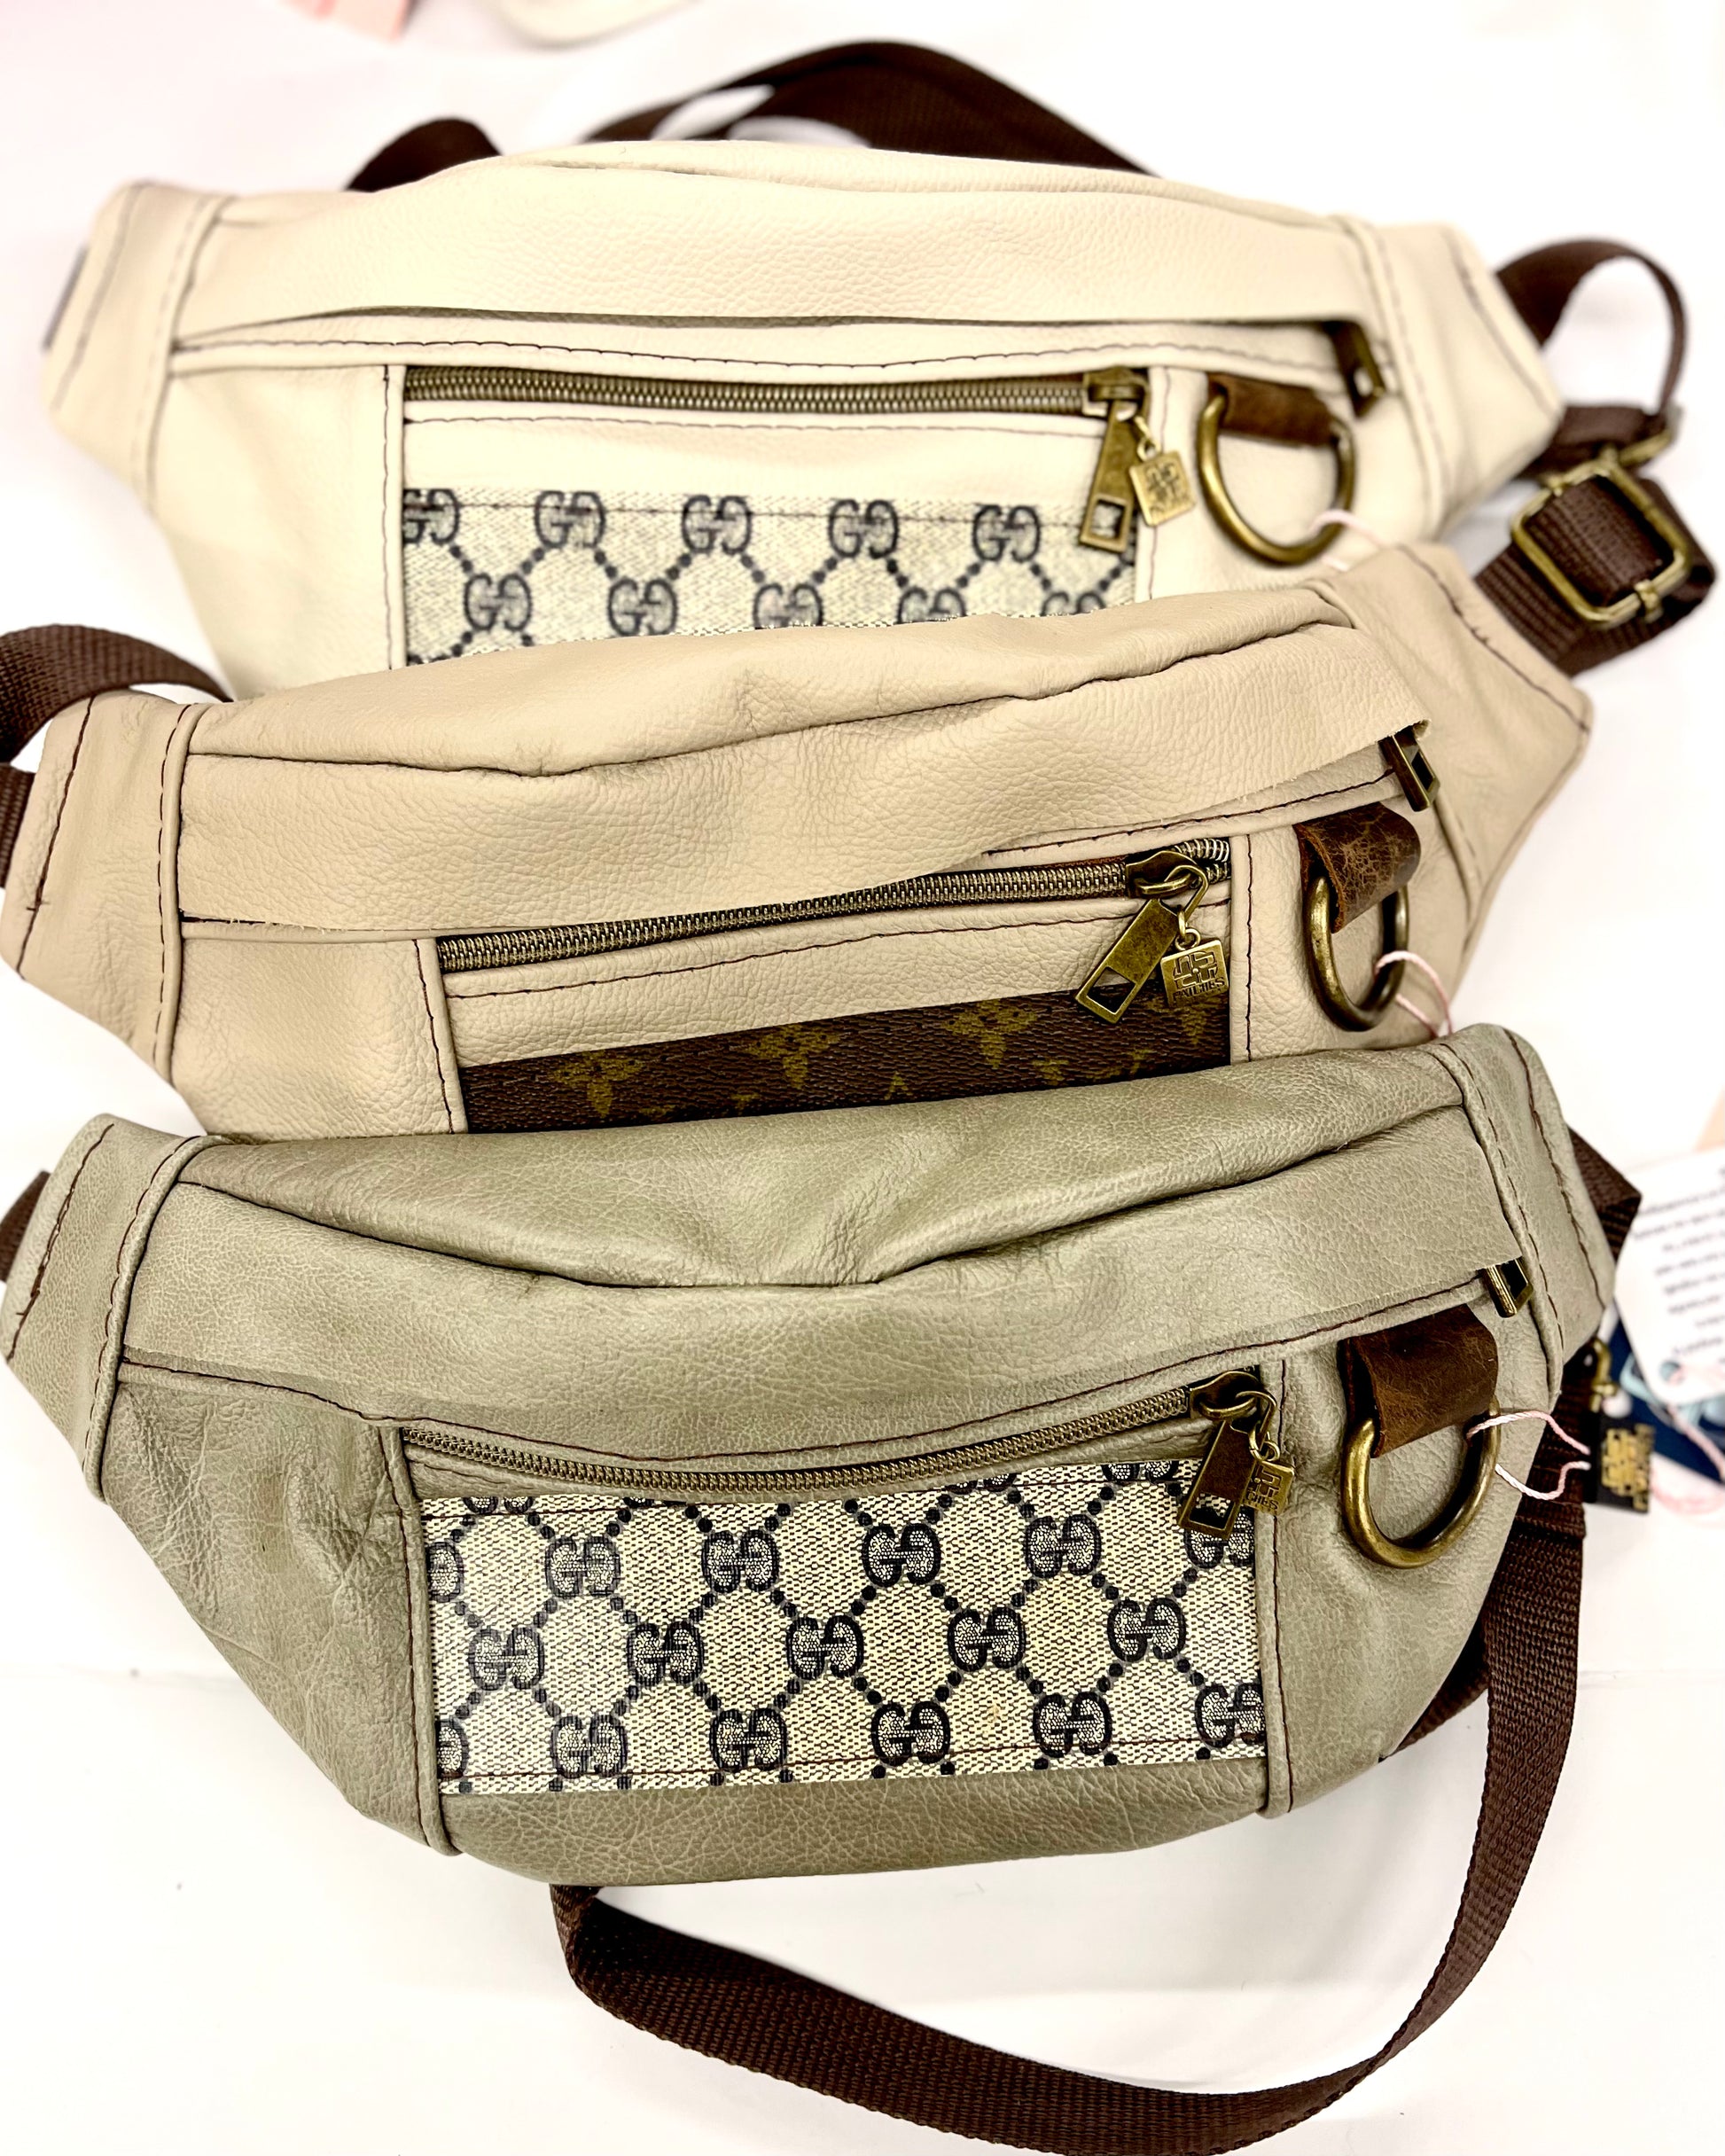 Adjustable Bum bag GG- multiple color options - Patches Of Upcycling